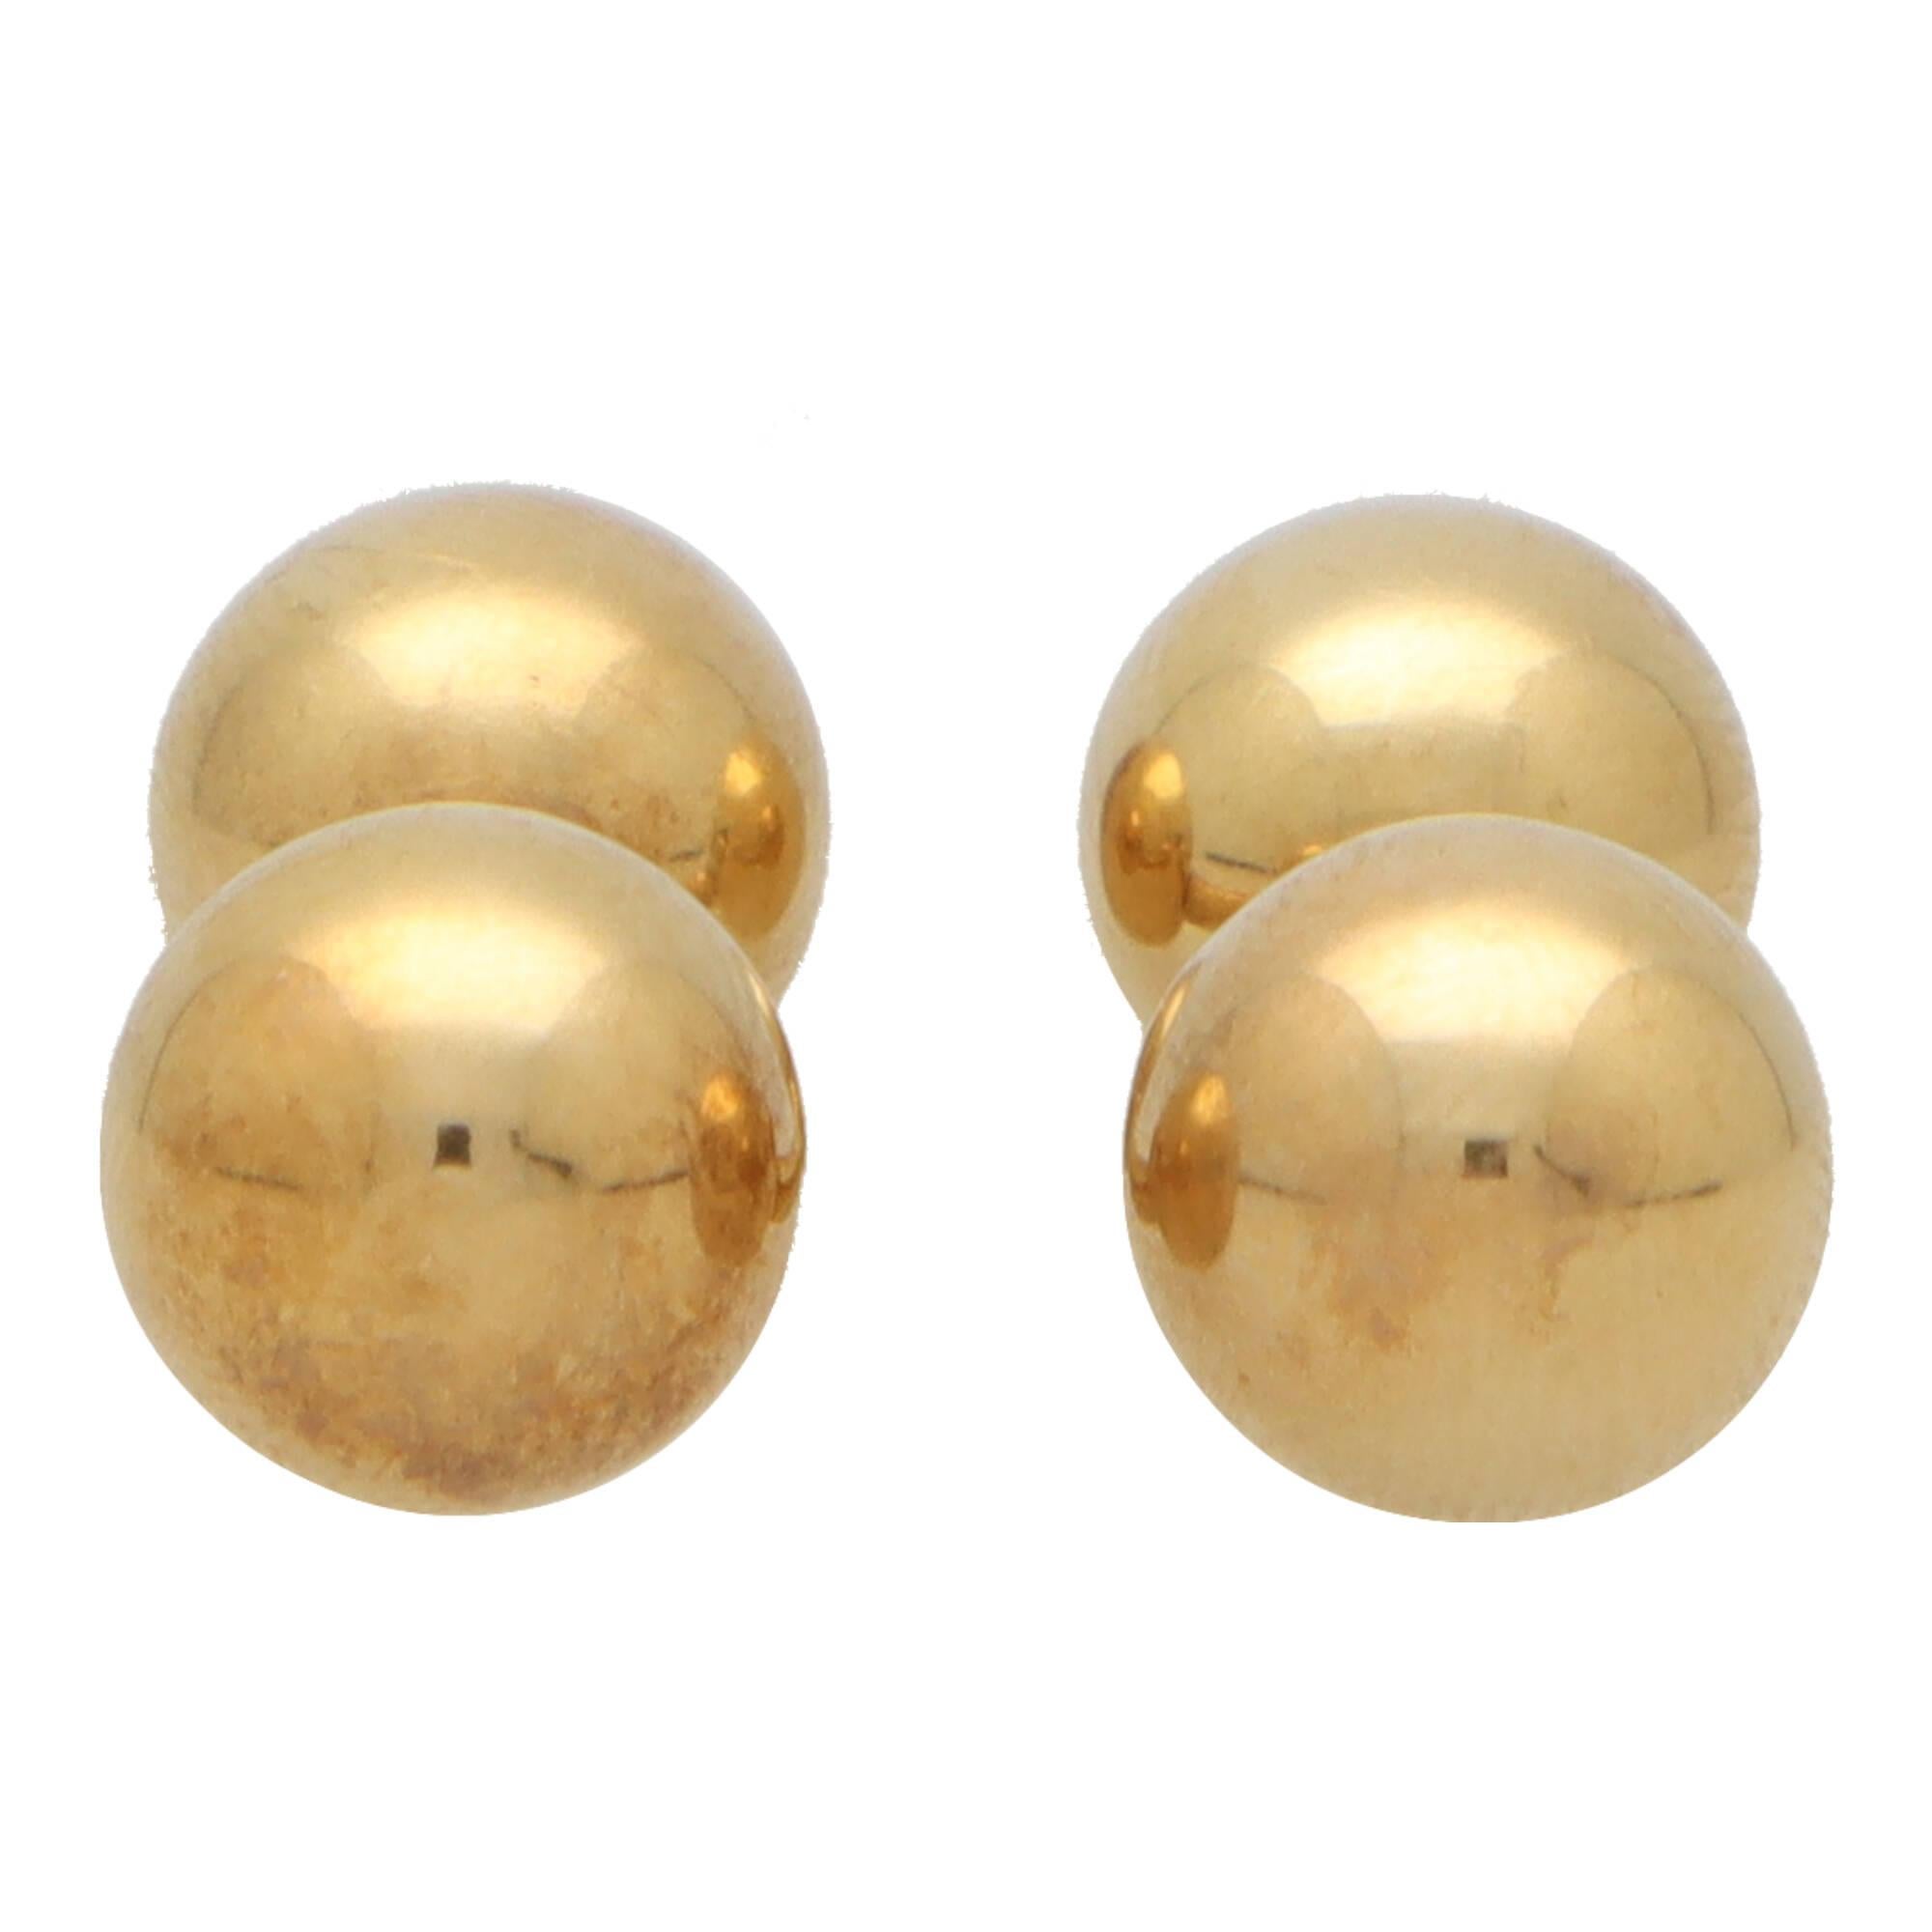 A extremely stylish pair of vintage Tiffany & Co. ball cufflinks in 18k yellow gold.

Each cufflink is composed of a yellow gold bar, sided with a polished yellow gold ball.

Due to the design these cufflinks can easily be paired with a variety of